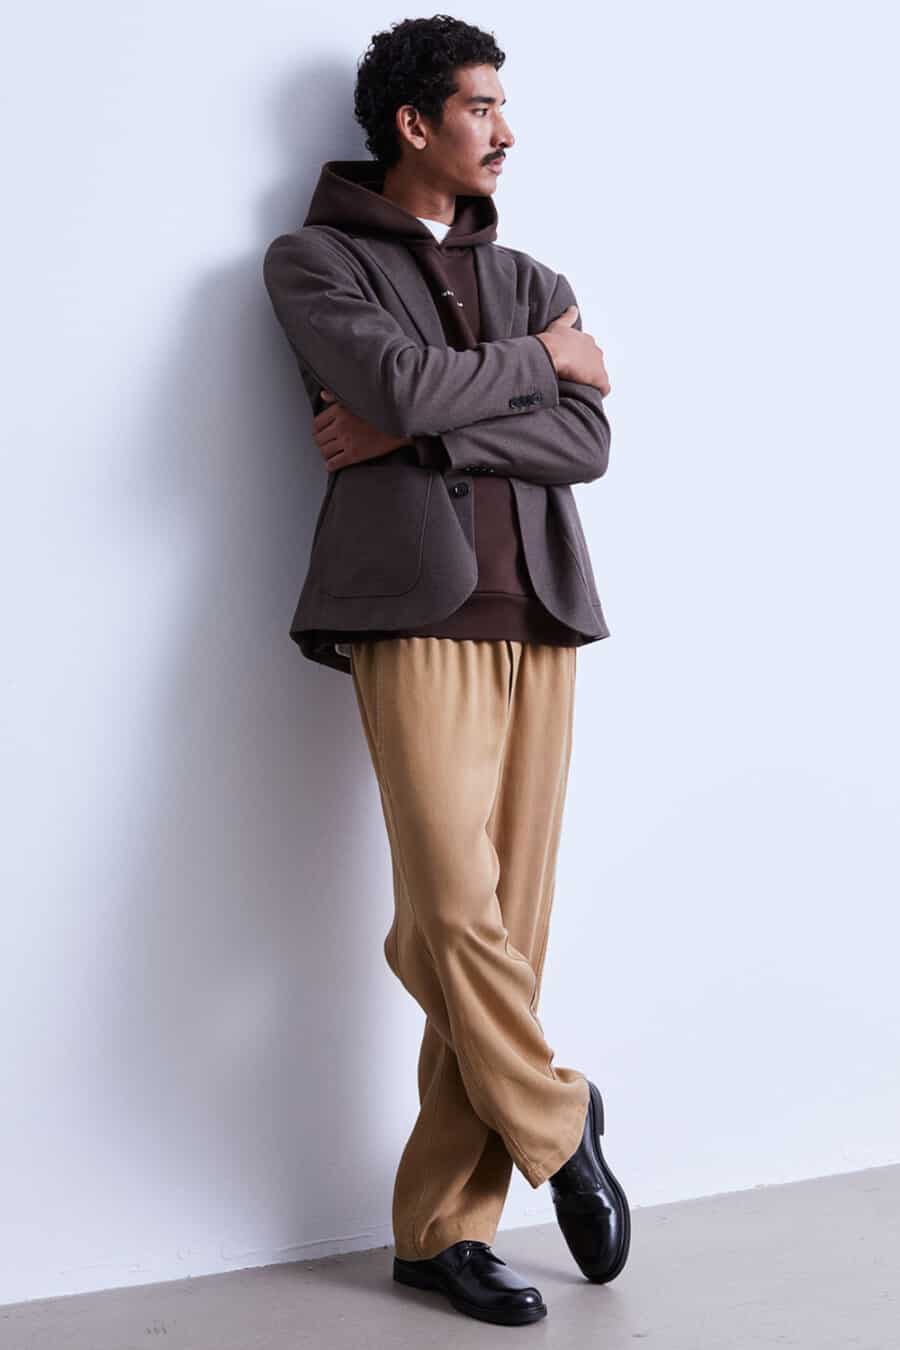 Men's loose khaki pants, brown hoodie, brown blazer and black Derby shoes outfit